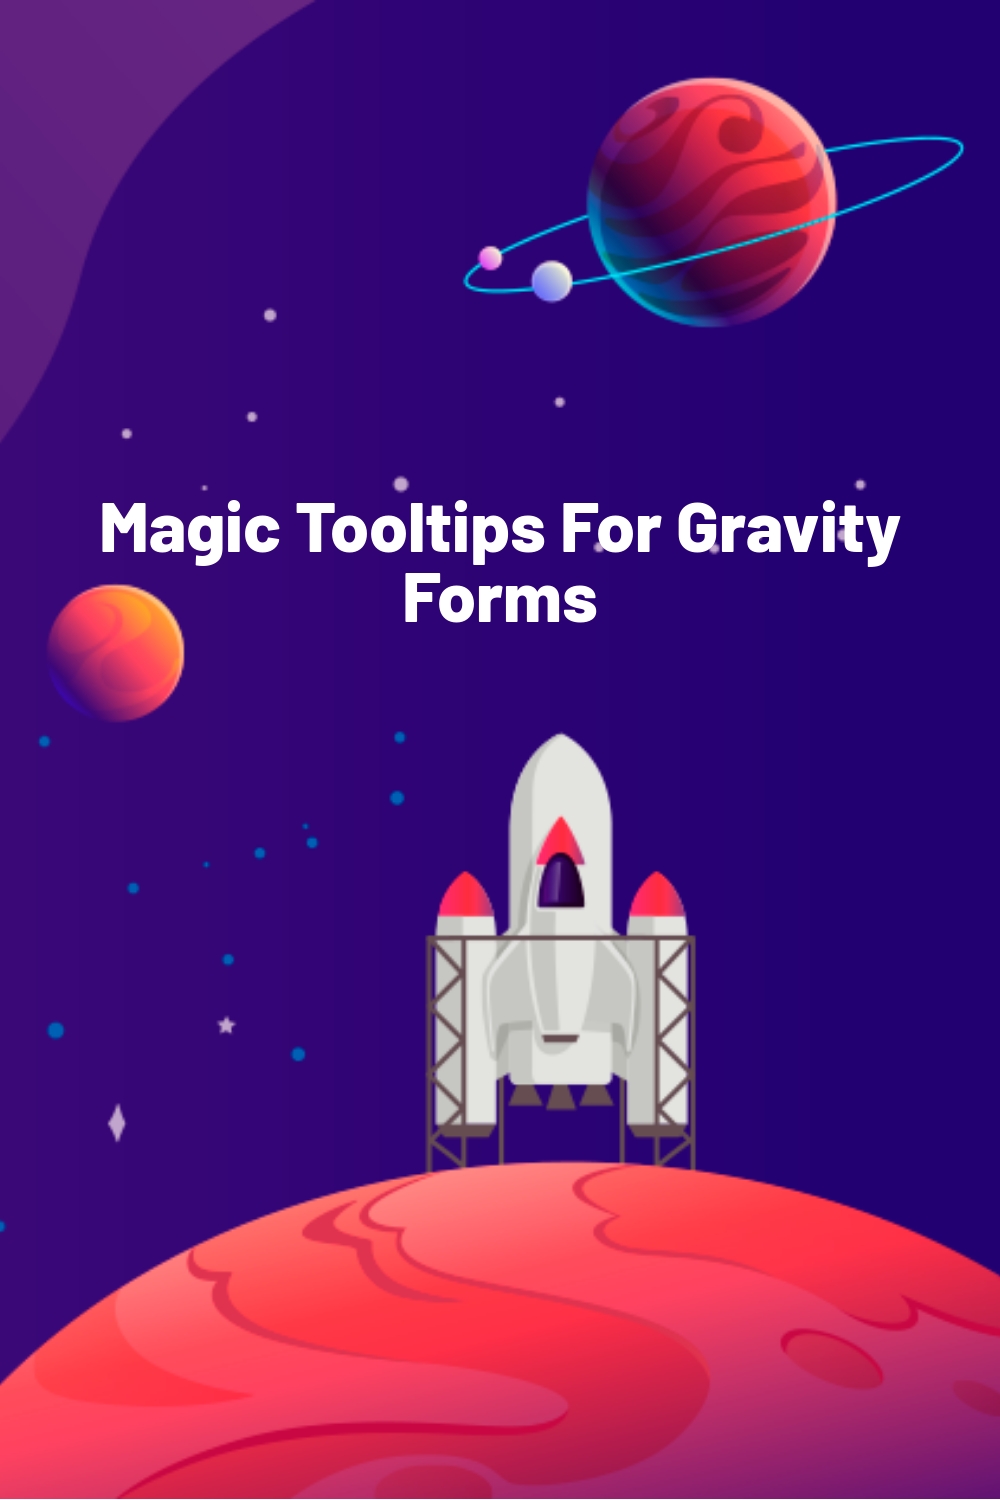 Magic Tooltips For Gravity Forms